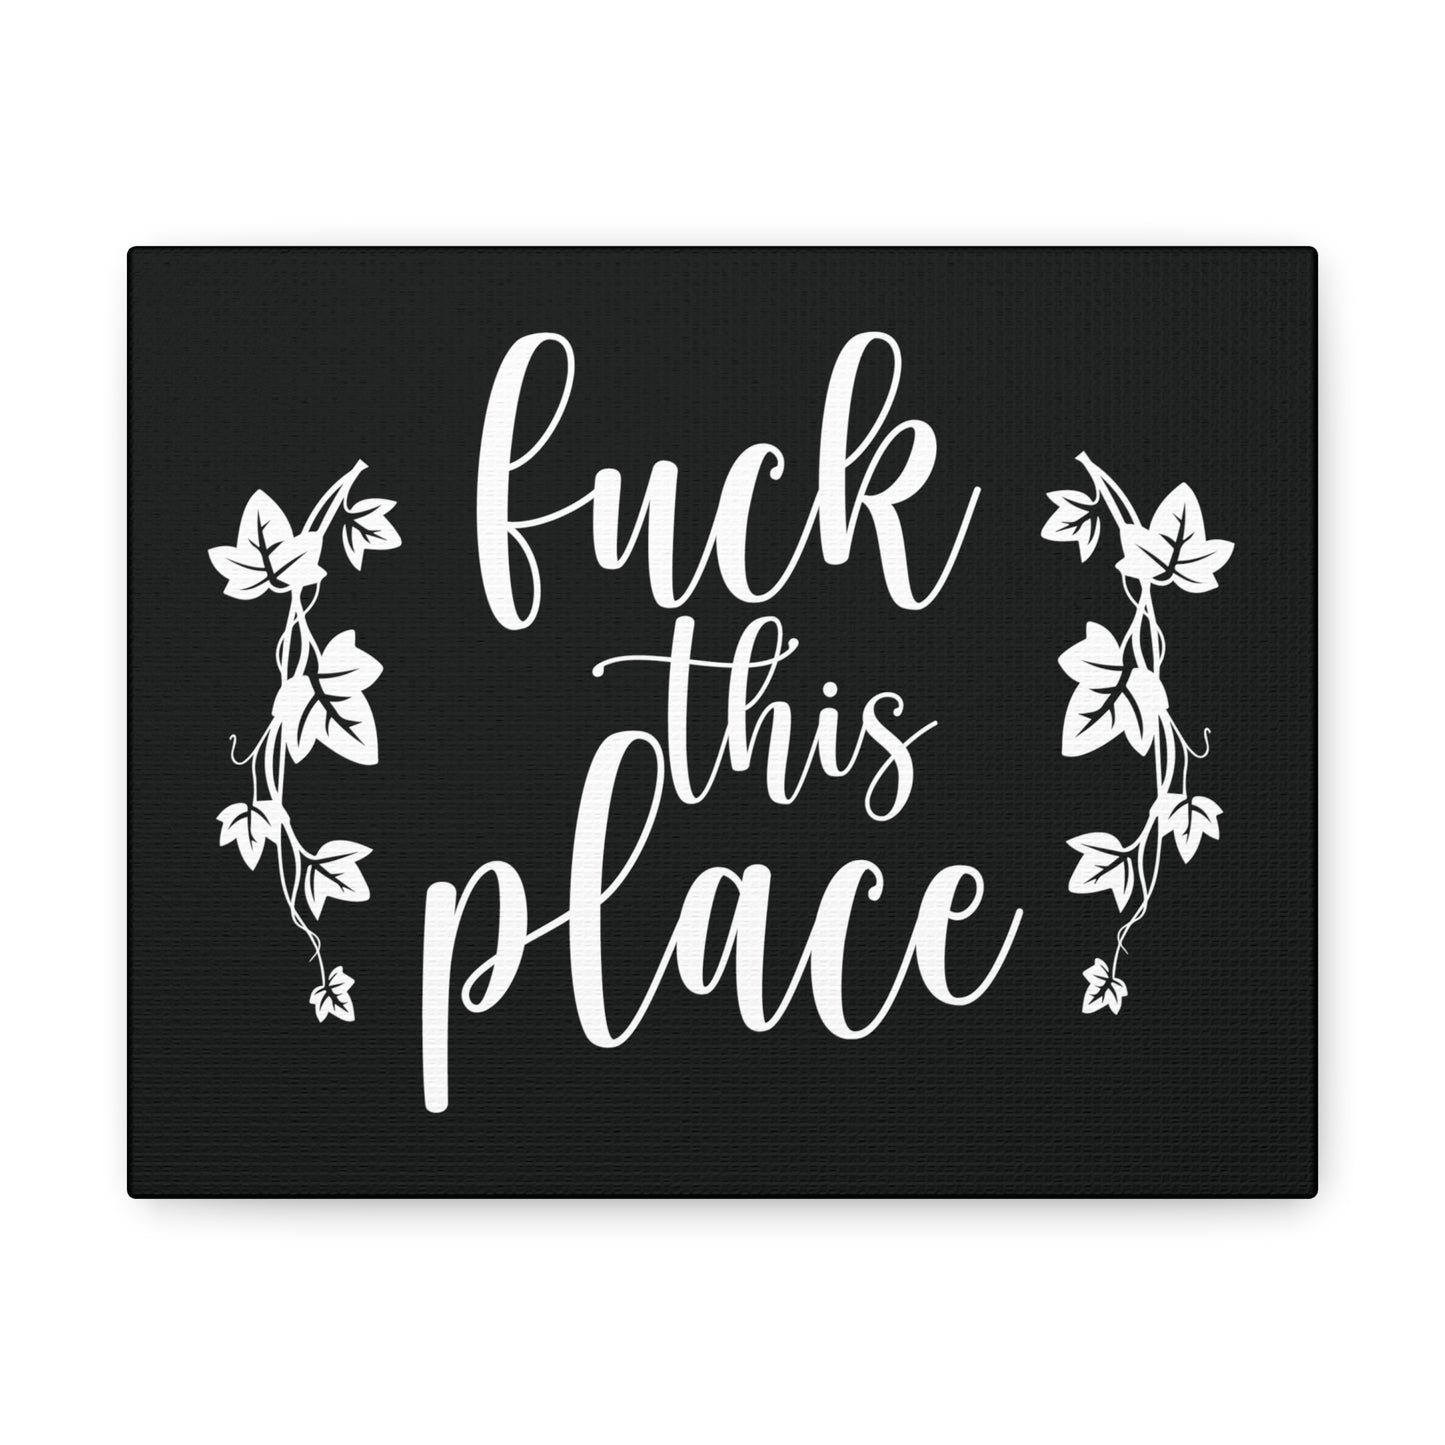 Fuck This Place -  Anti "Bless This House" Canvas (Black)